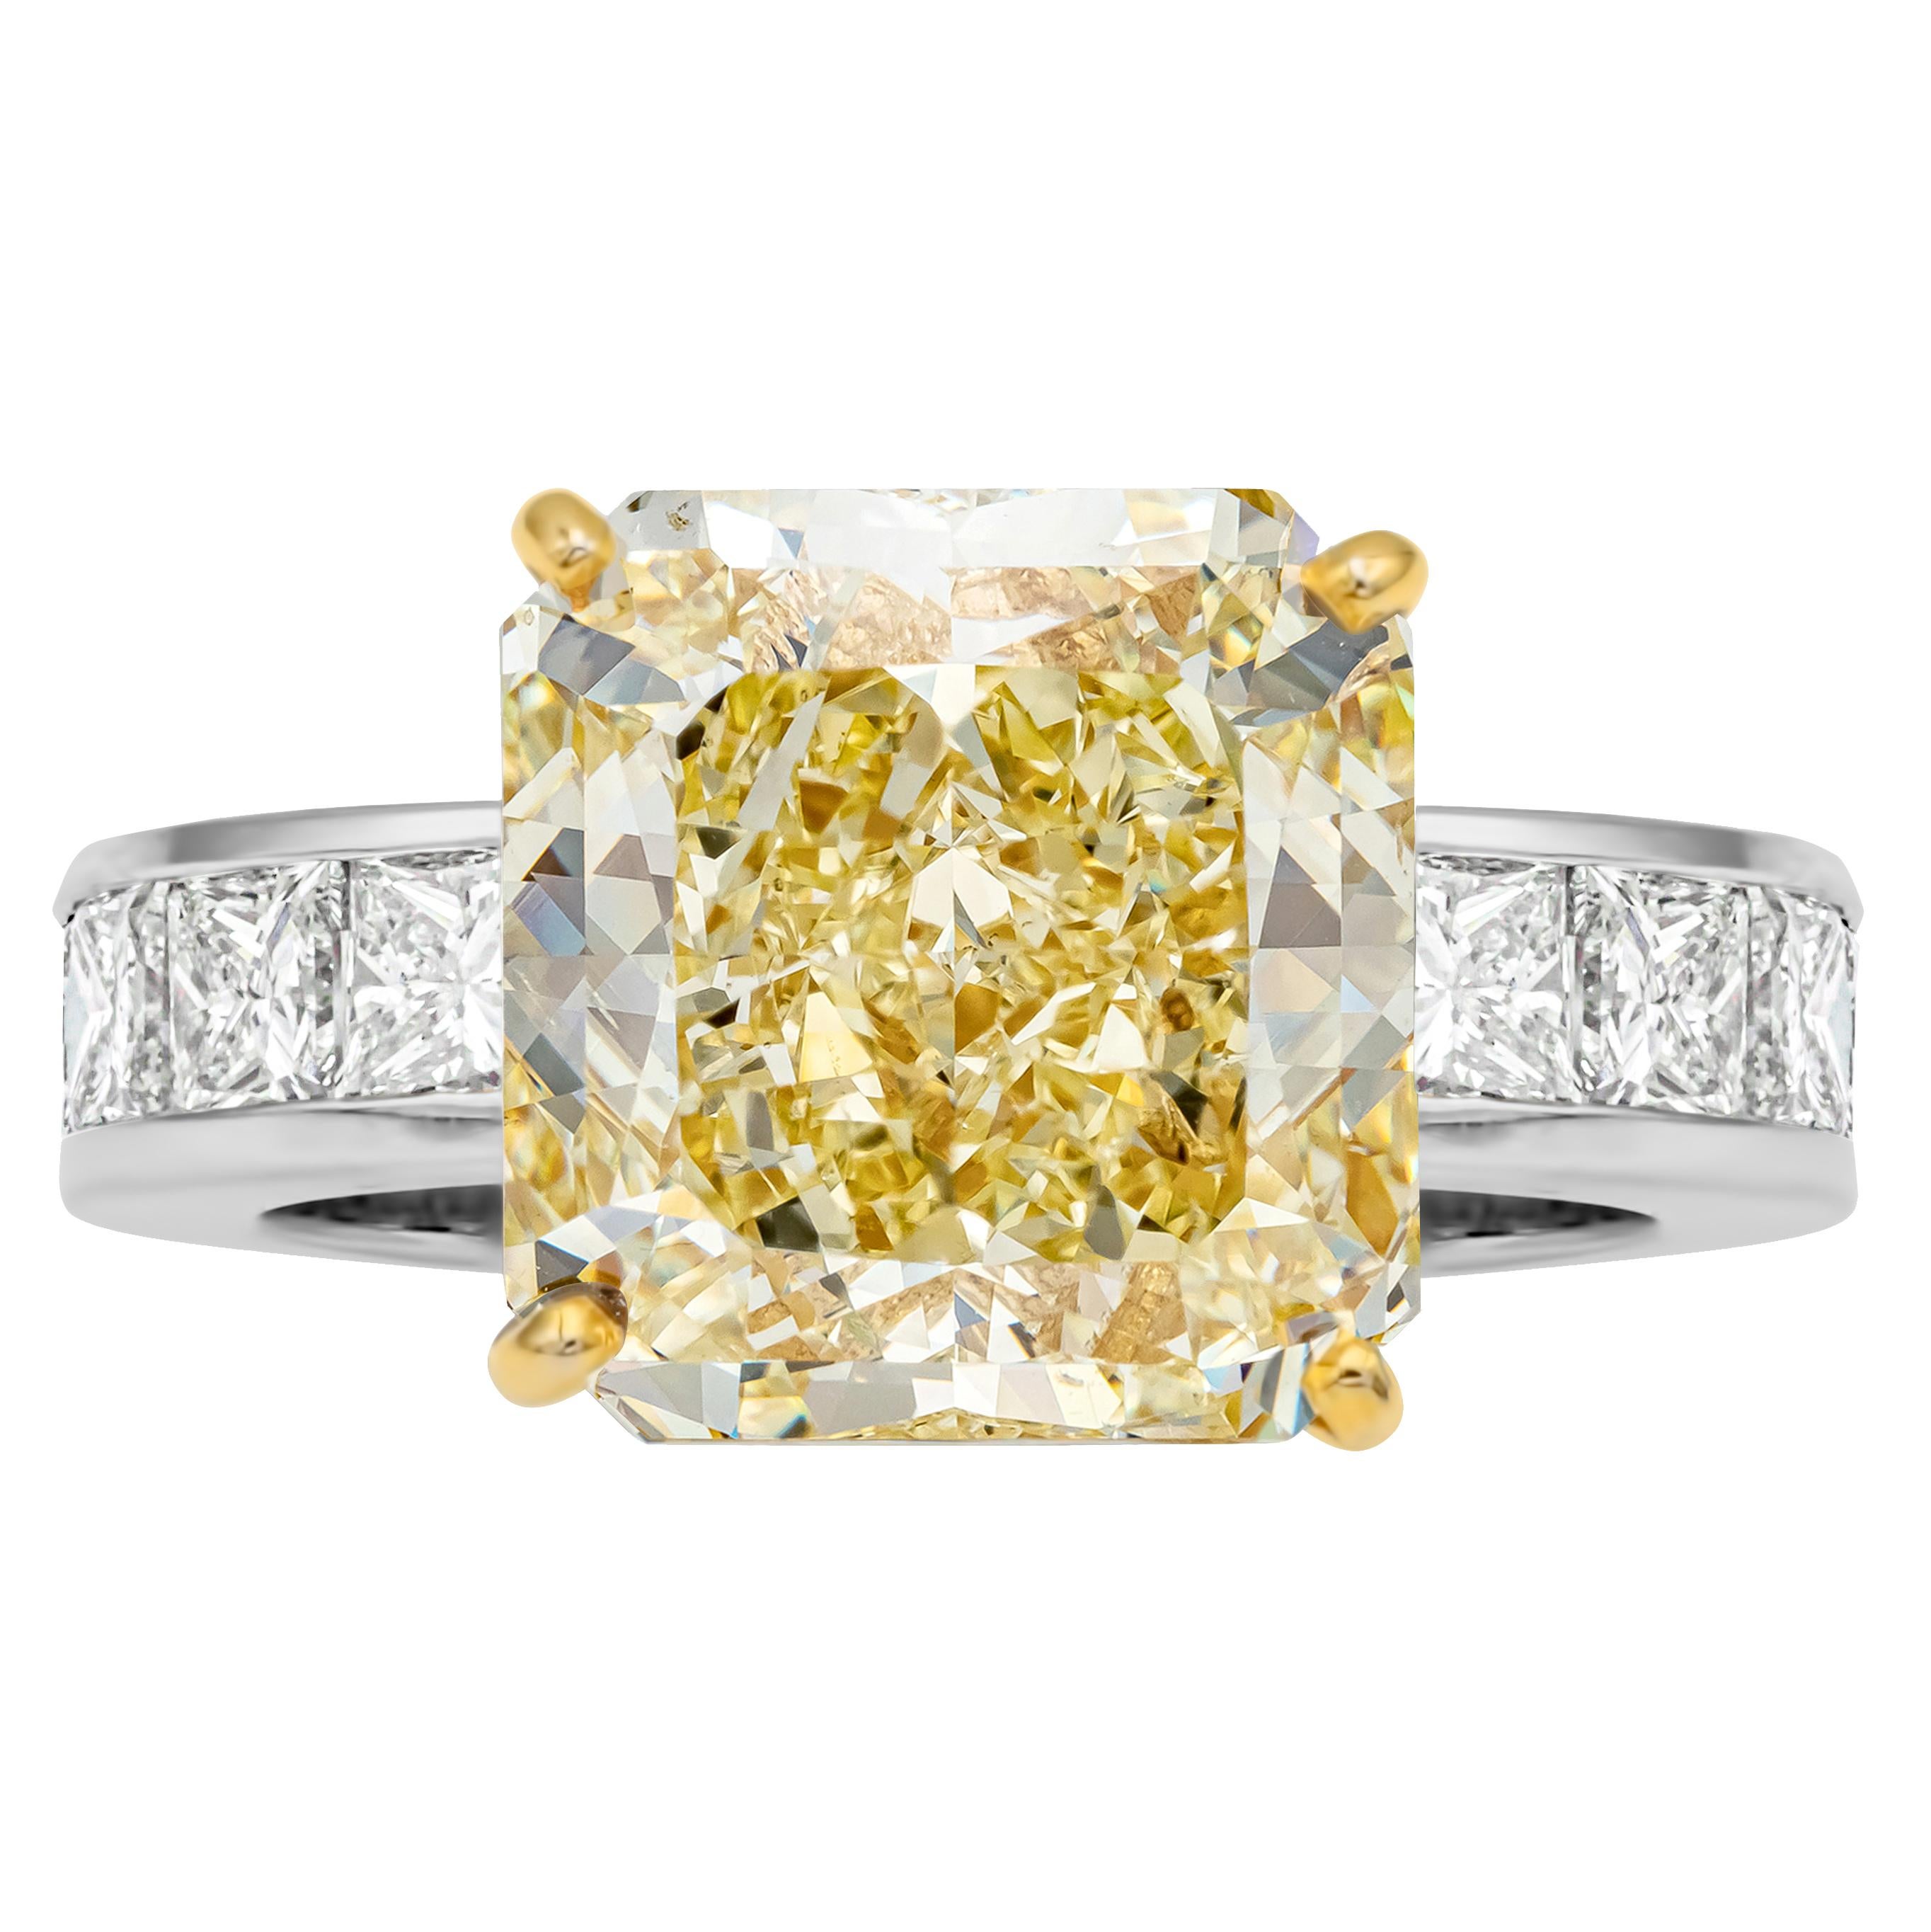 This classic and timeless engagement ring features a GIA Certified radiant cut center stone weighing 9.36 carats total, Fancy Yellow color and VS2 in Clarity, securely set in a four prong setting in 18K Yellow Gold. Accented by princess cut diamonds